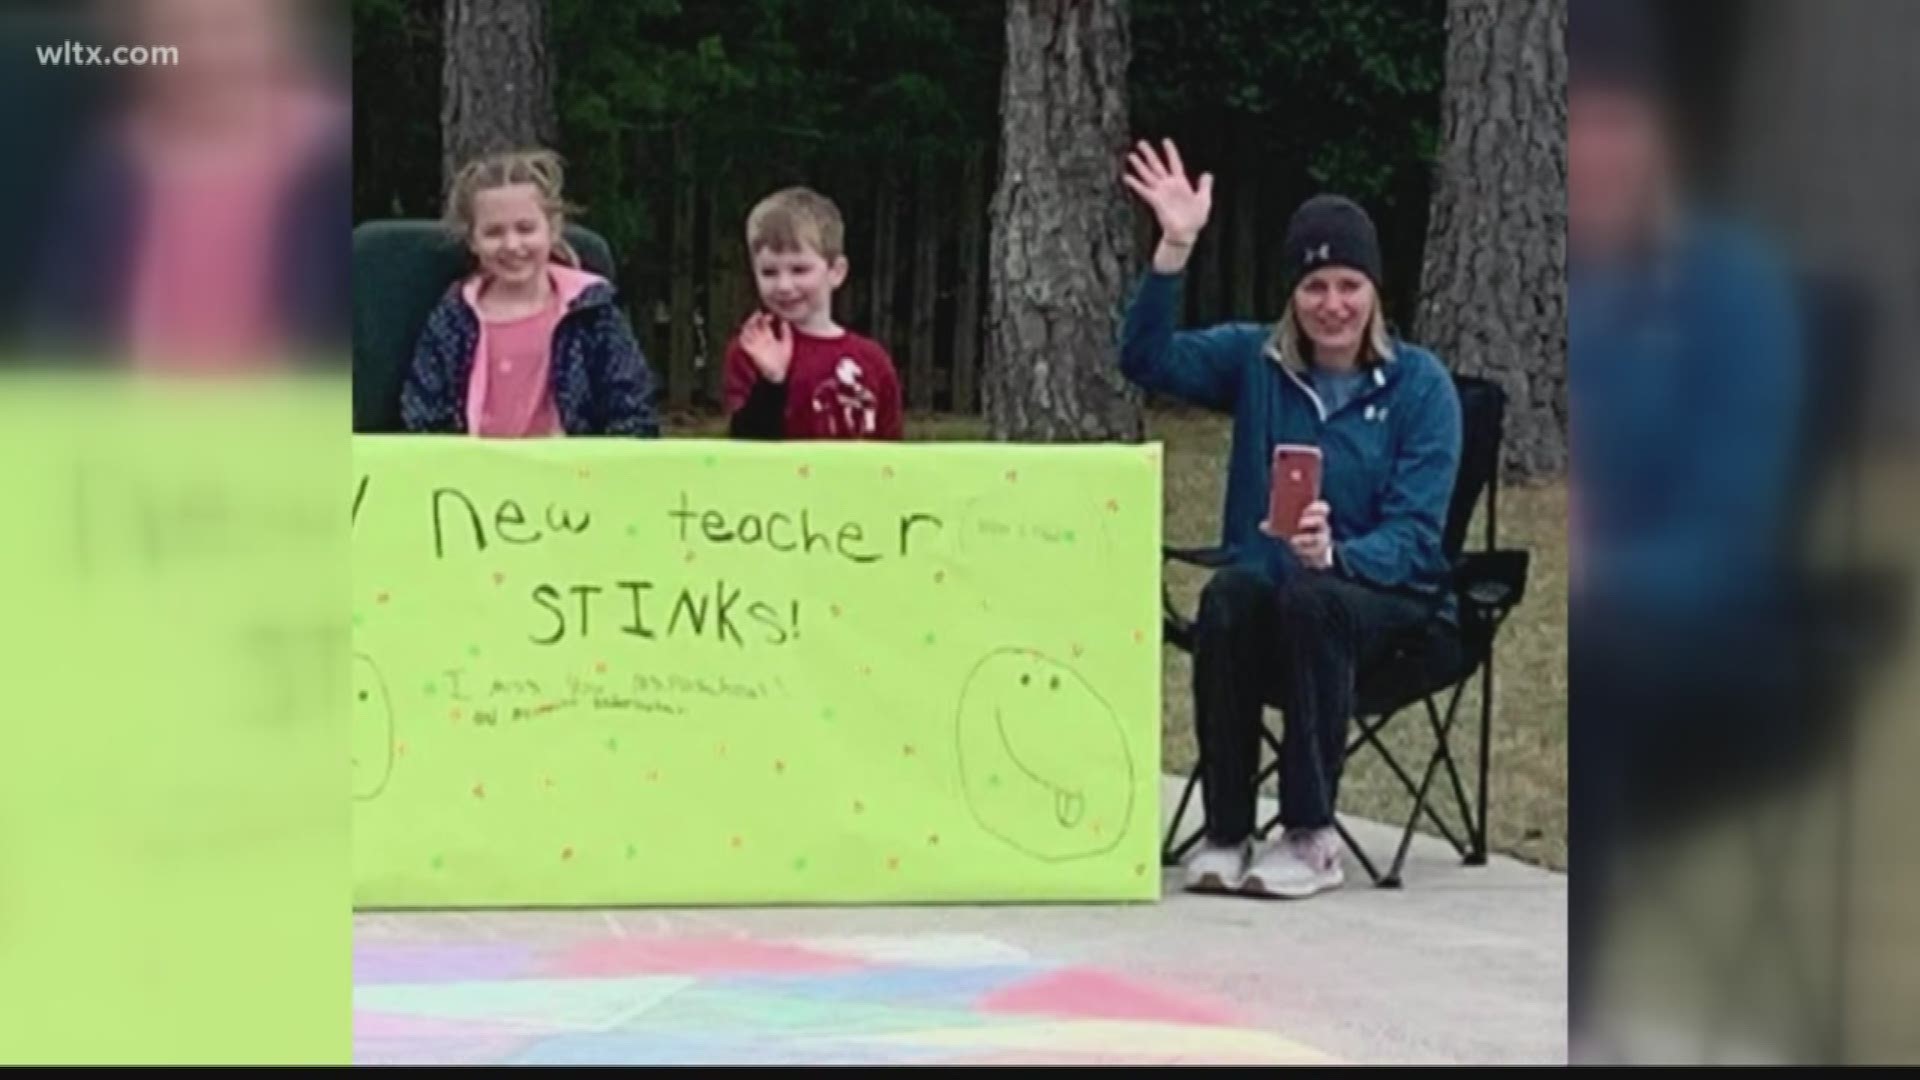 Sumter teachers checked in on some of their students with a parade through the neighborhood.